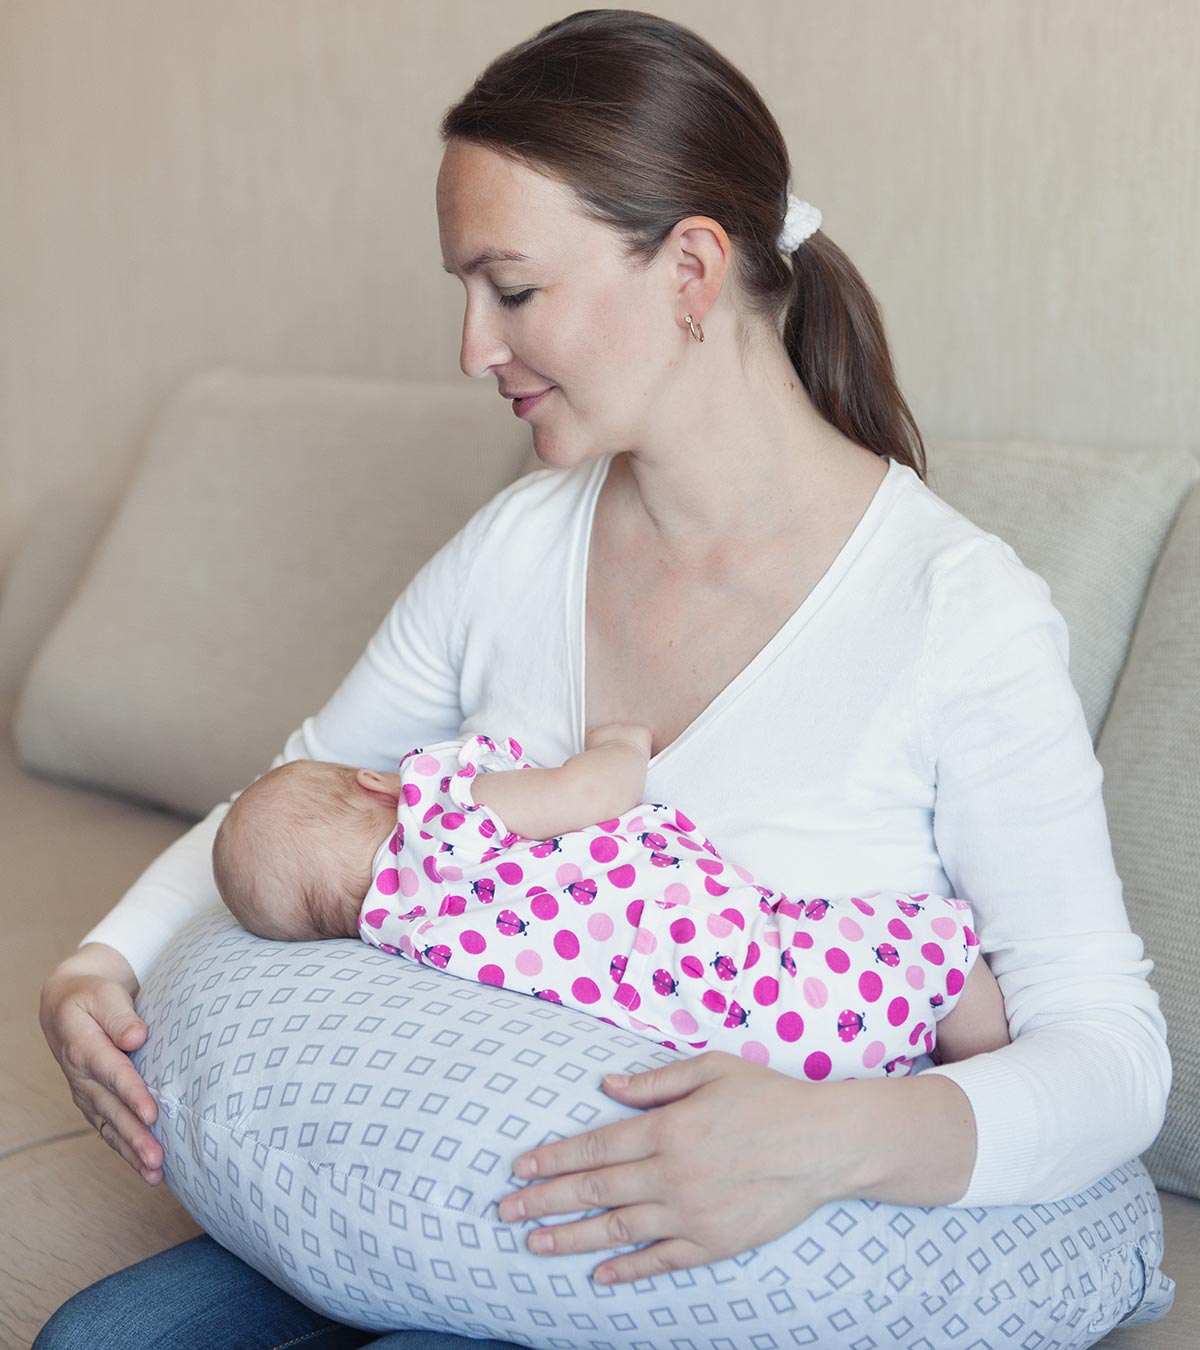 7 Tips For Breastfeeding Moms On The Use Of Feeding Pillows